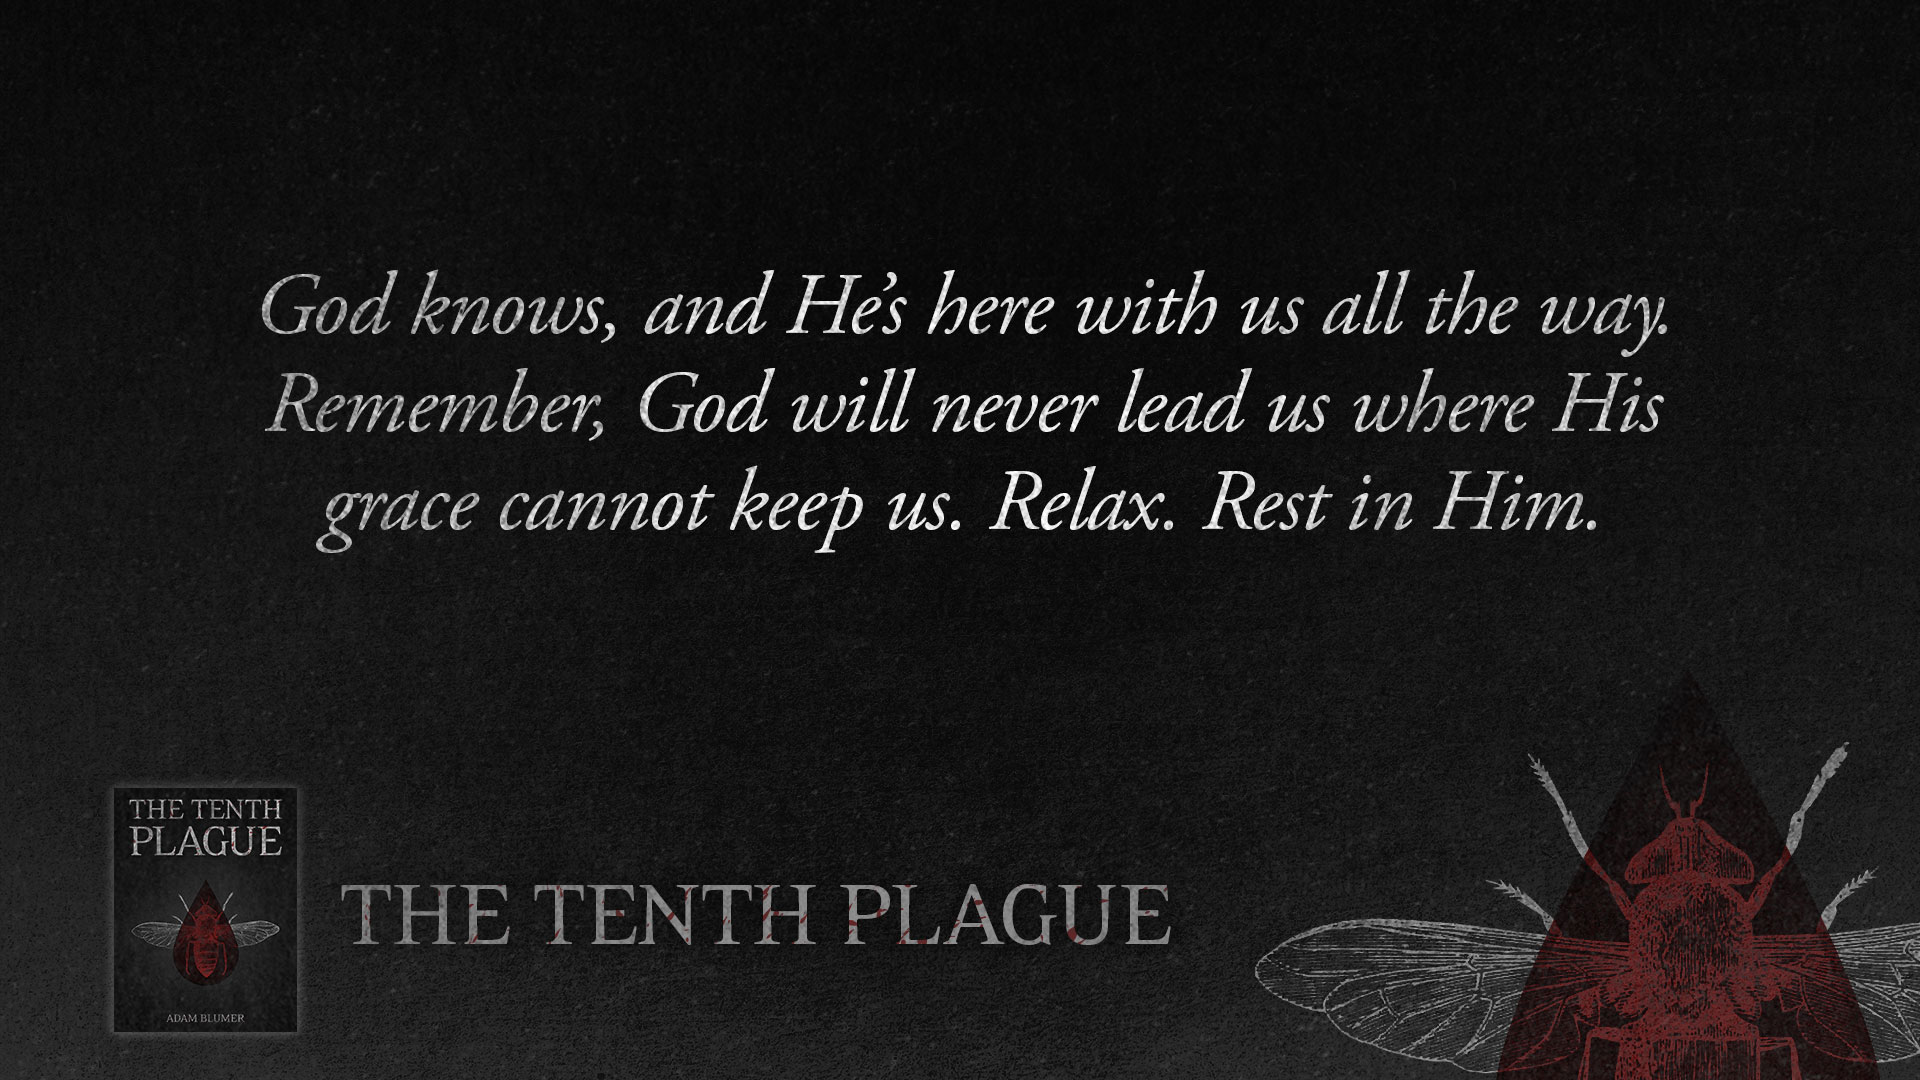 Quotes from The Tenth Plague